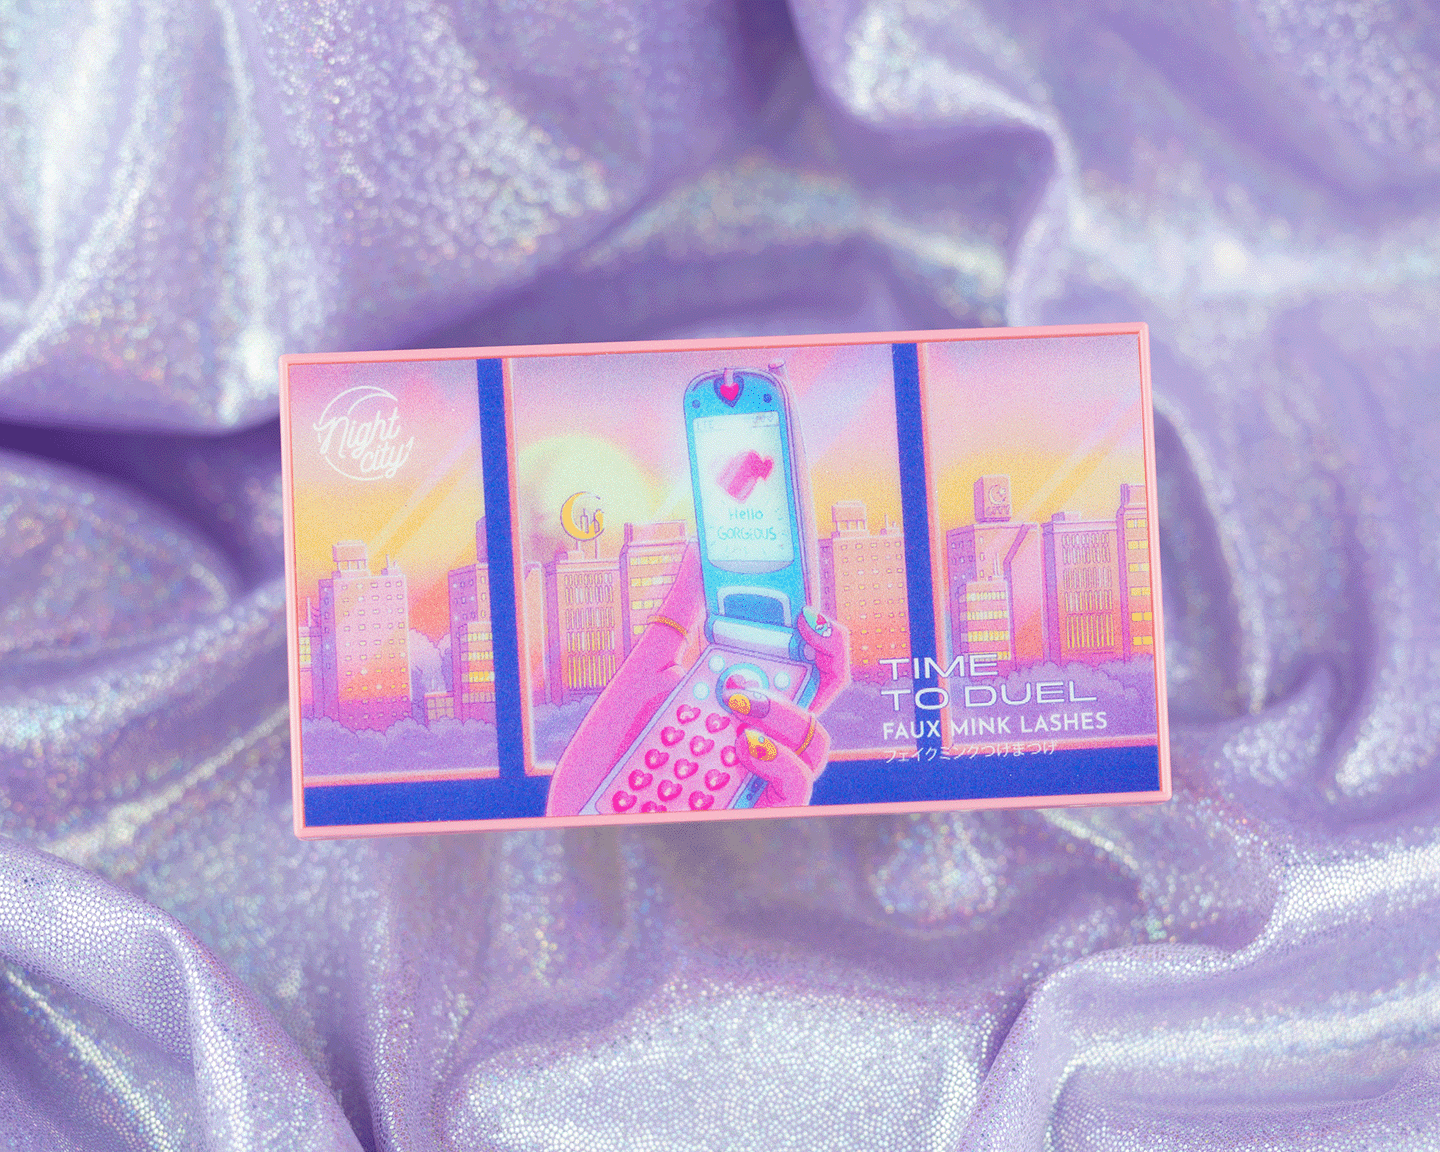 The packaging of the Time to Duet Faux Mink Lashes by High City, which features a pink phone with a cityscape in the background - 90s anime